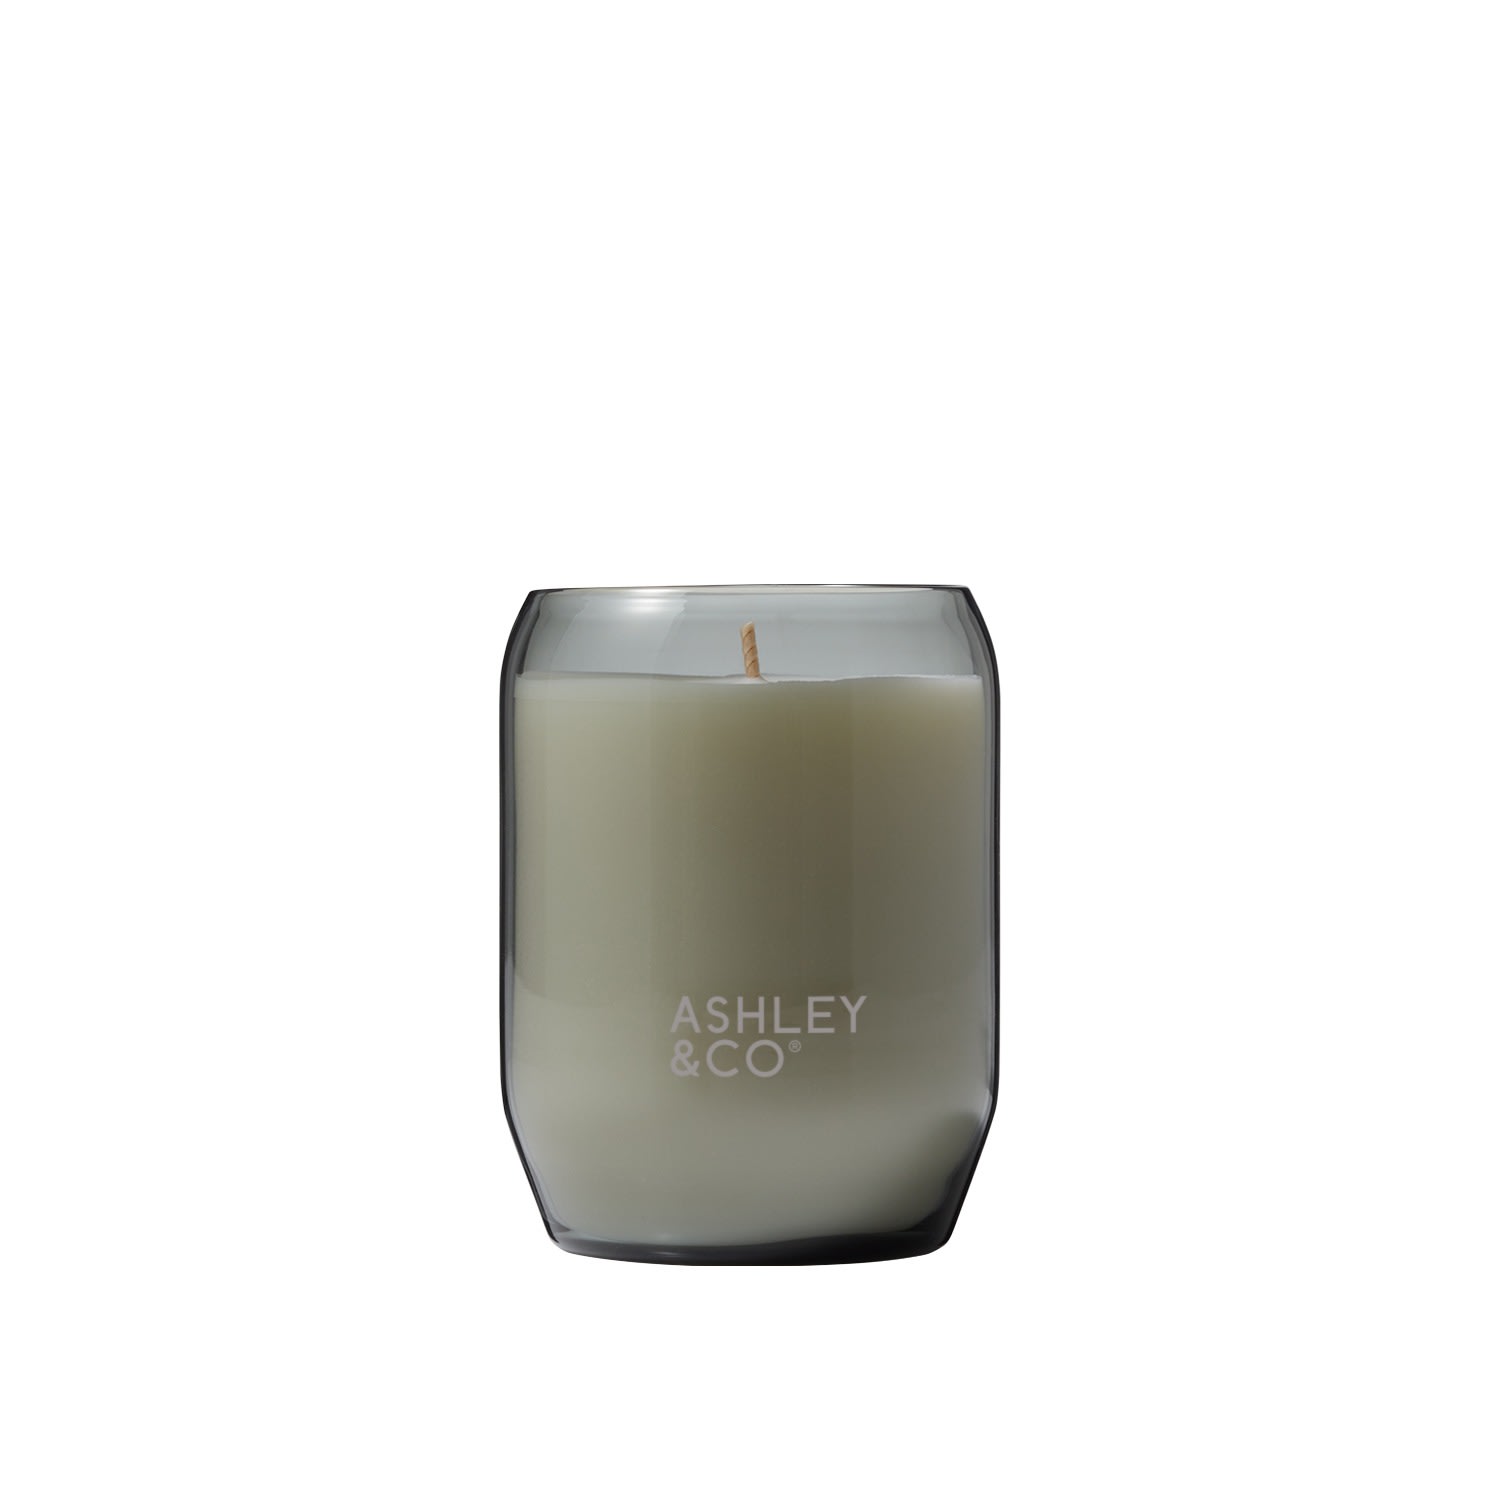 Waxed Perfume Scented Candle Blossom & Gilt Ashley & Co